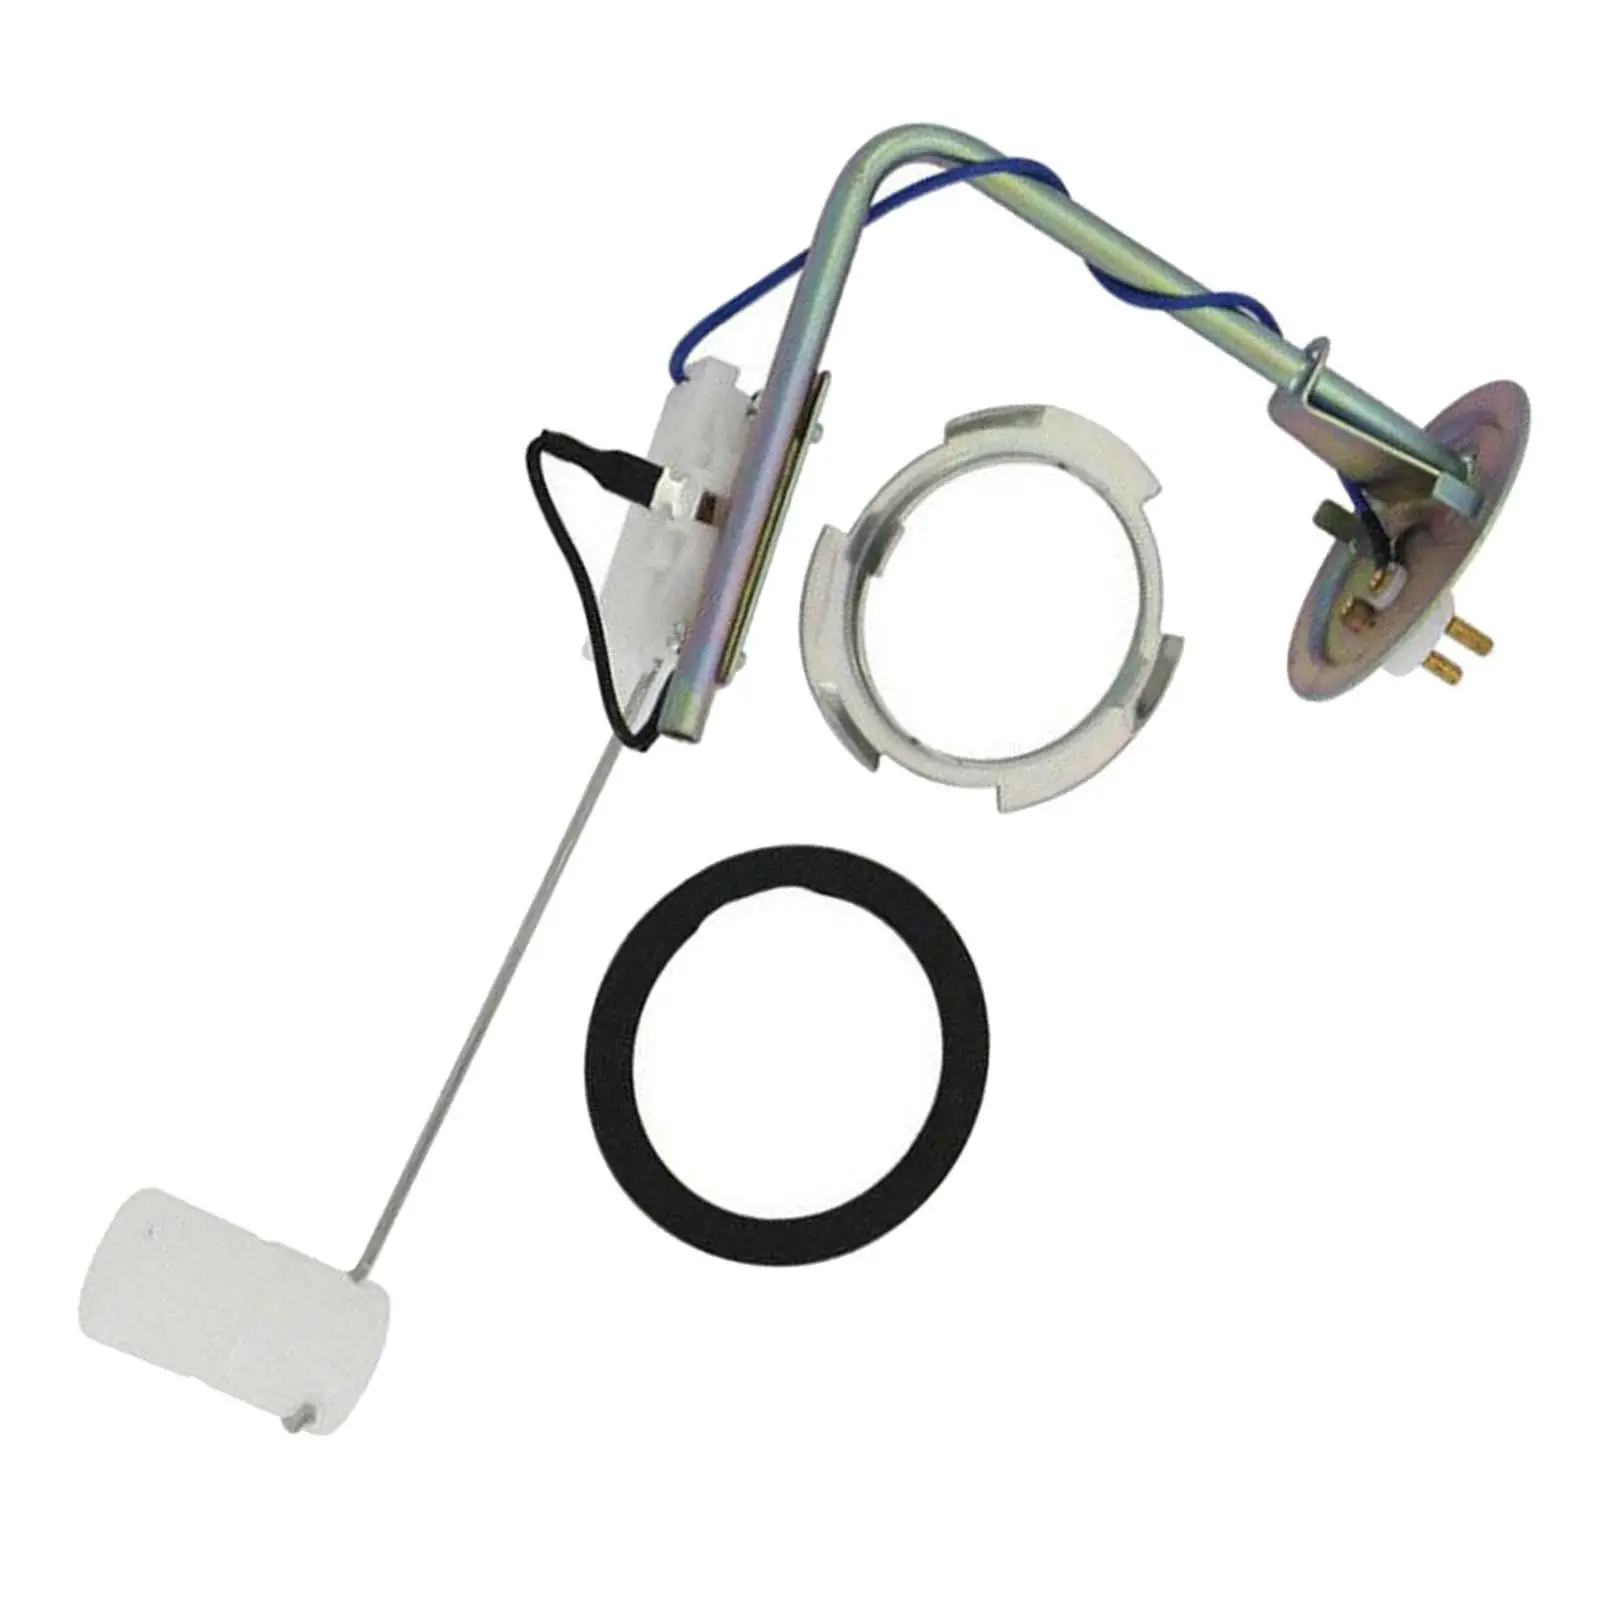 Fuel Pump Sender Easy to Install Professional Spare Parts Replaces Durable 539GE E0LY-9275-b for Lincoln Mercury 1980-1989